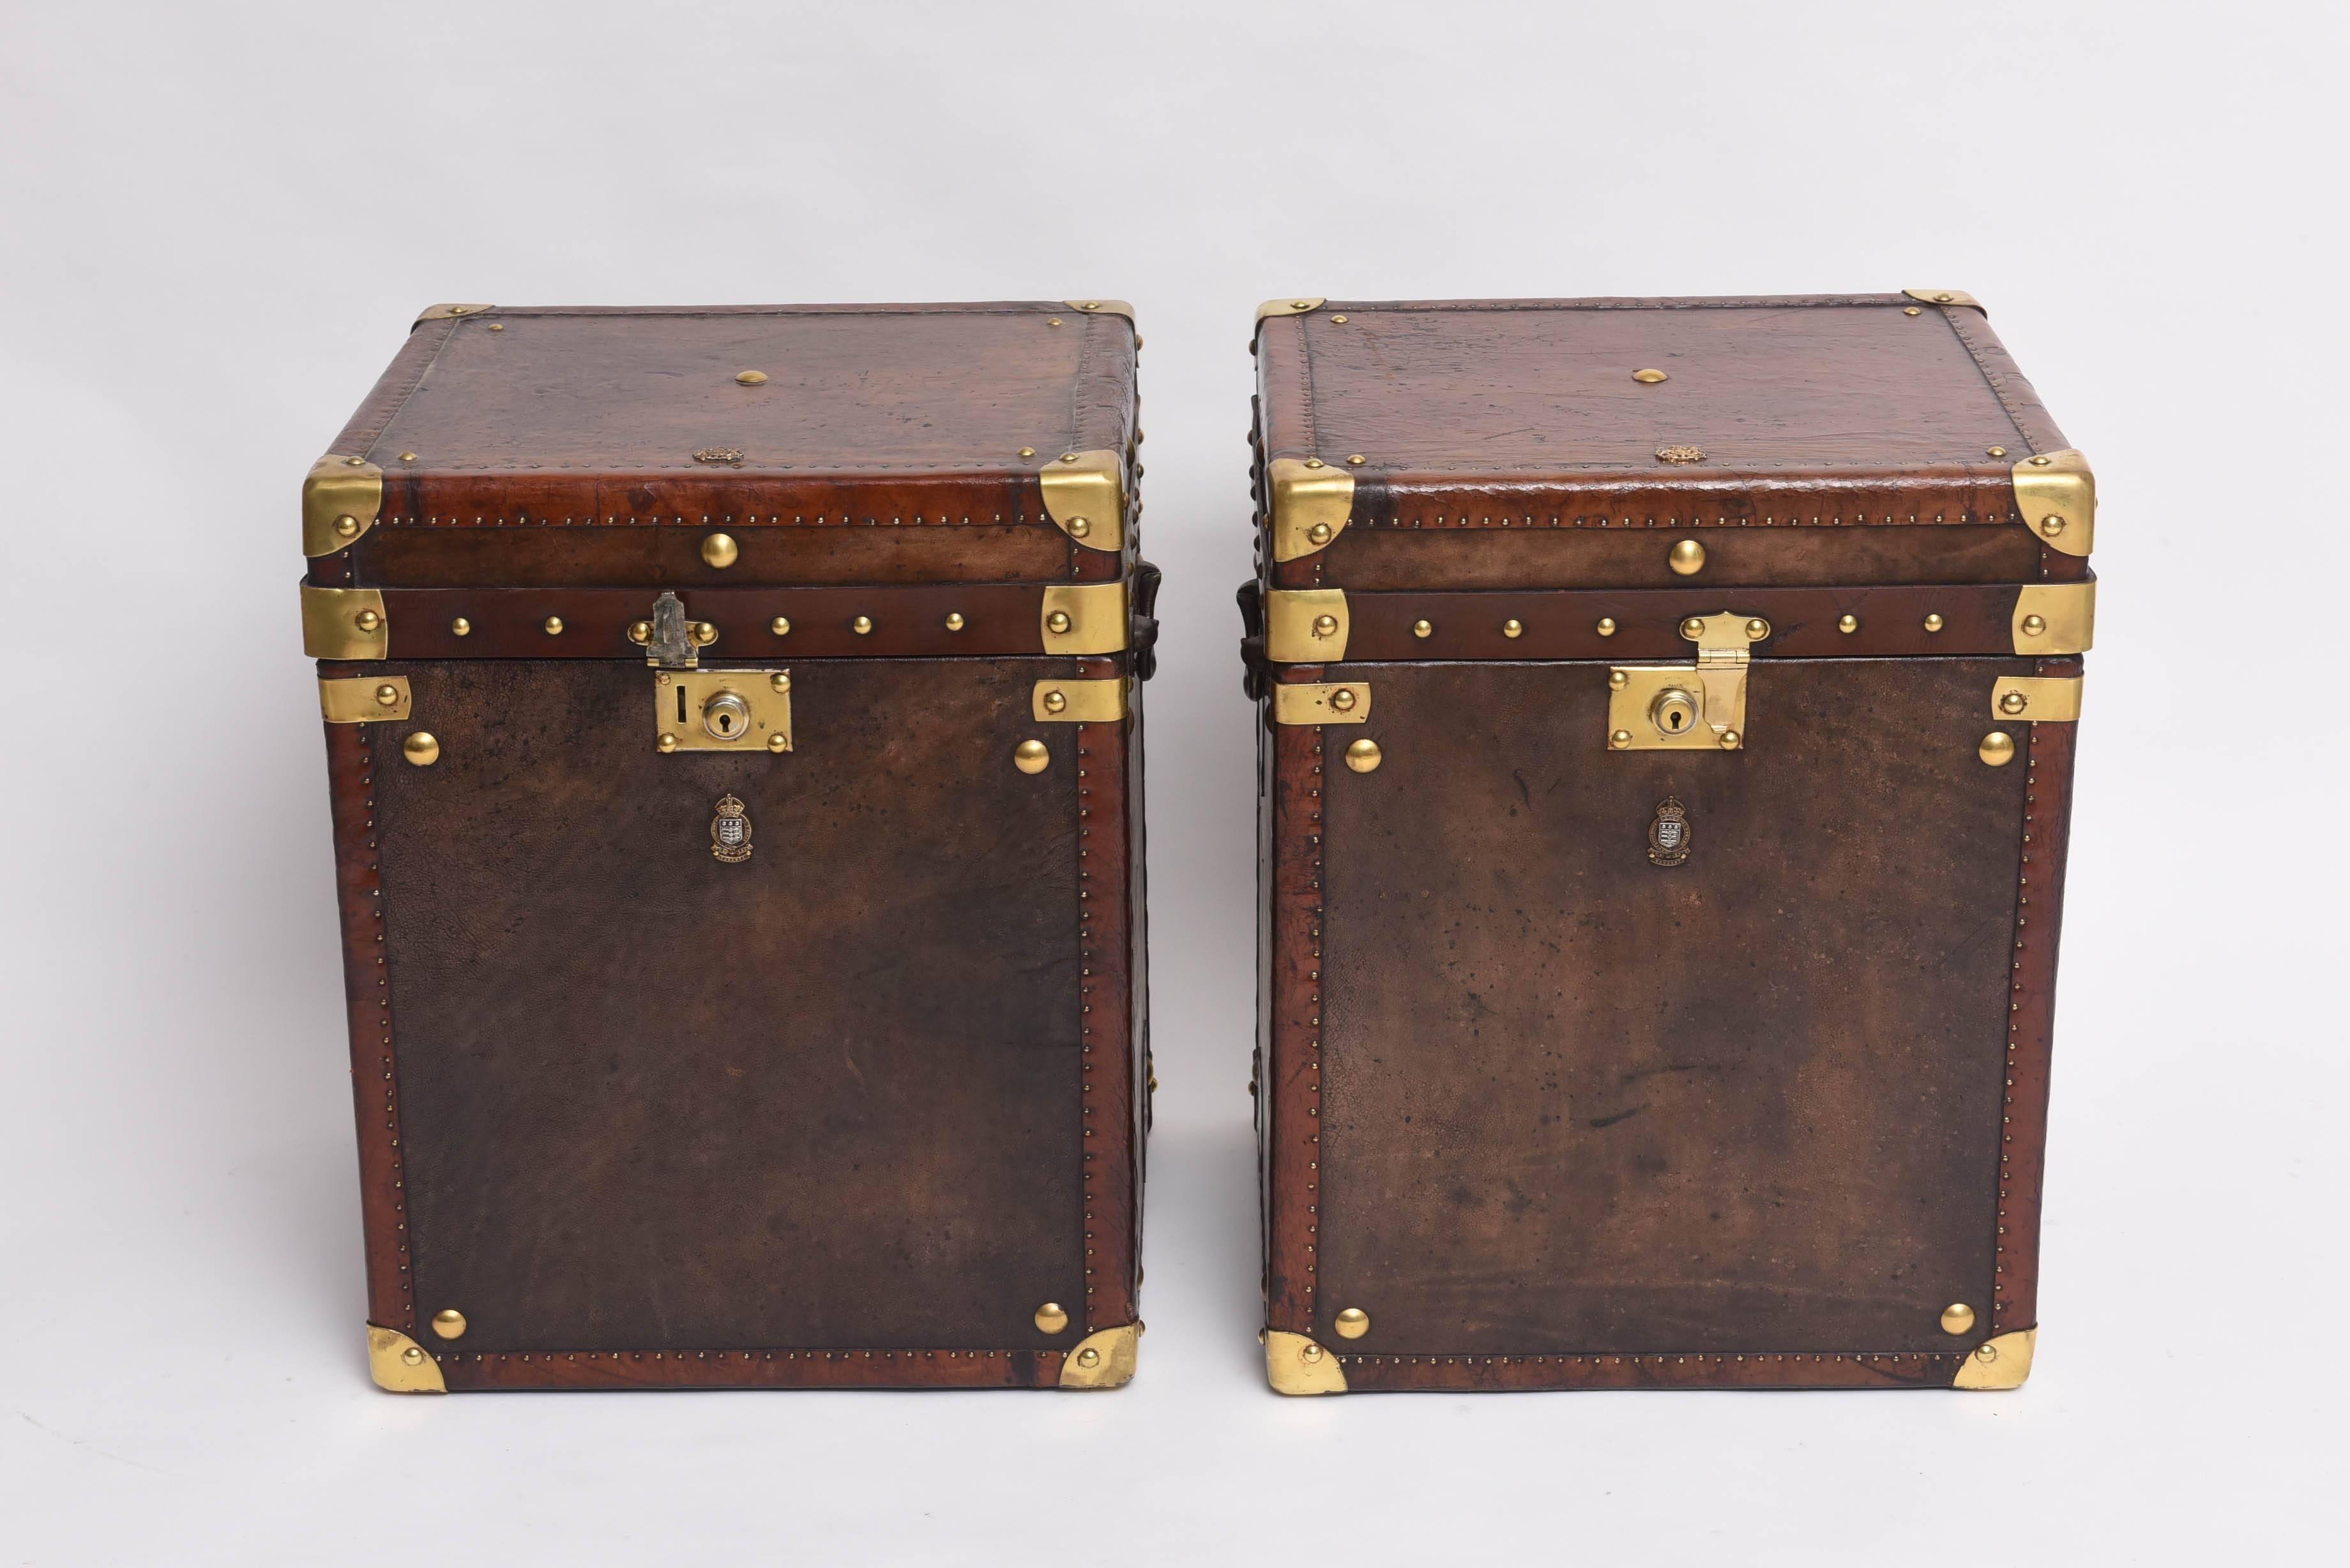 This pair of rare and handsome British-Colonial style leather-clad trunks were purchased in London.  They are referred to as 